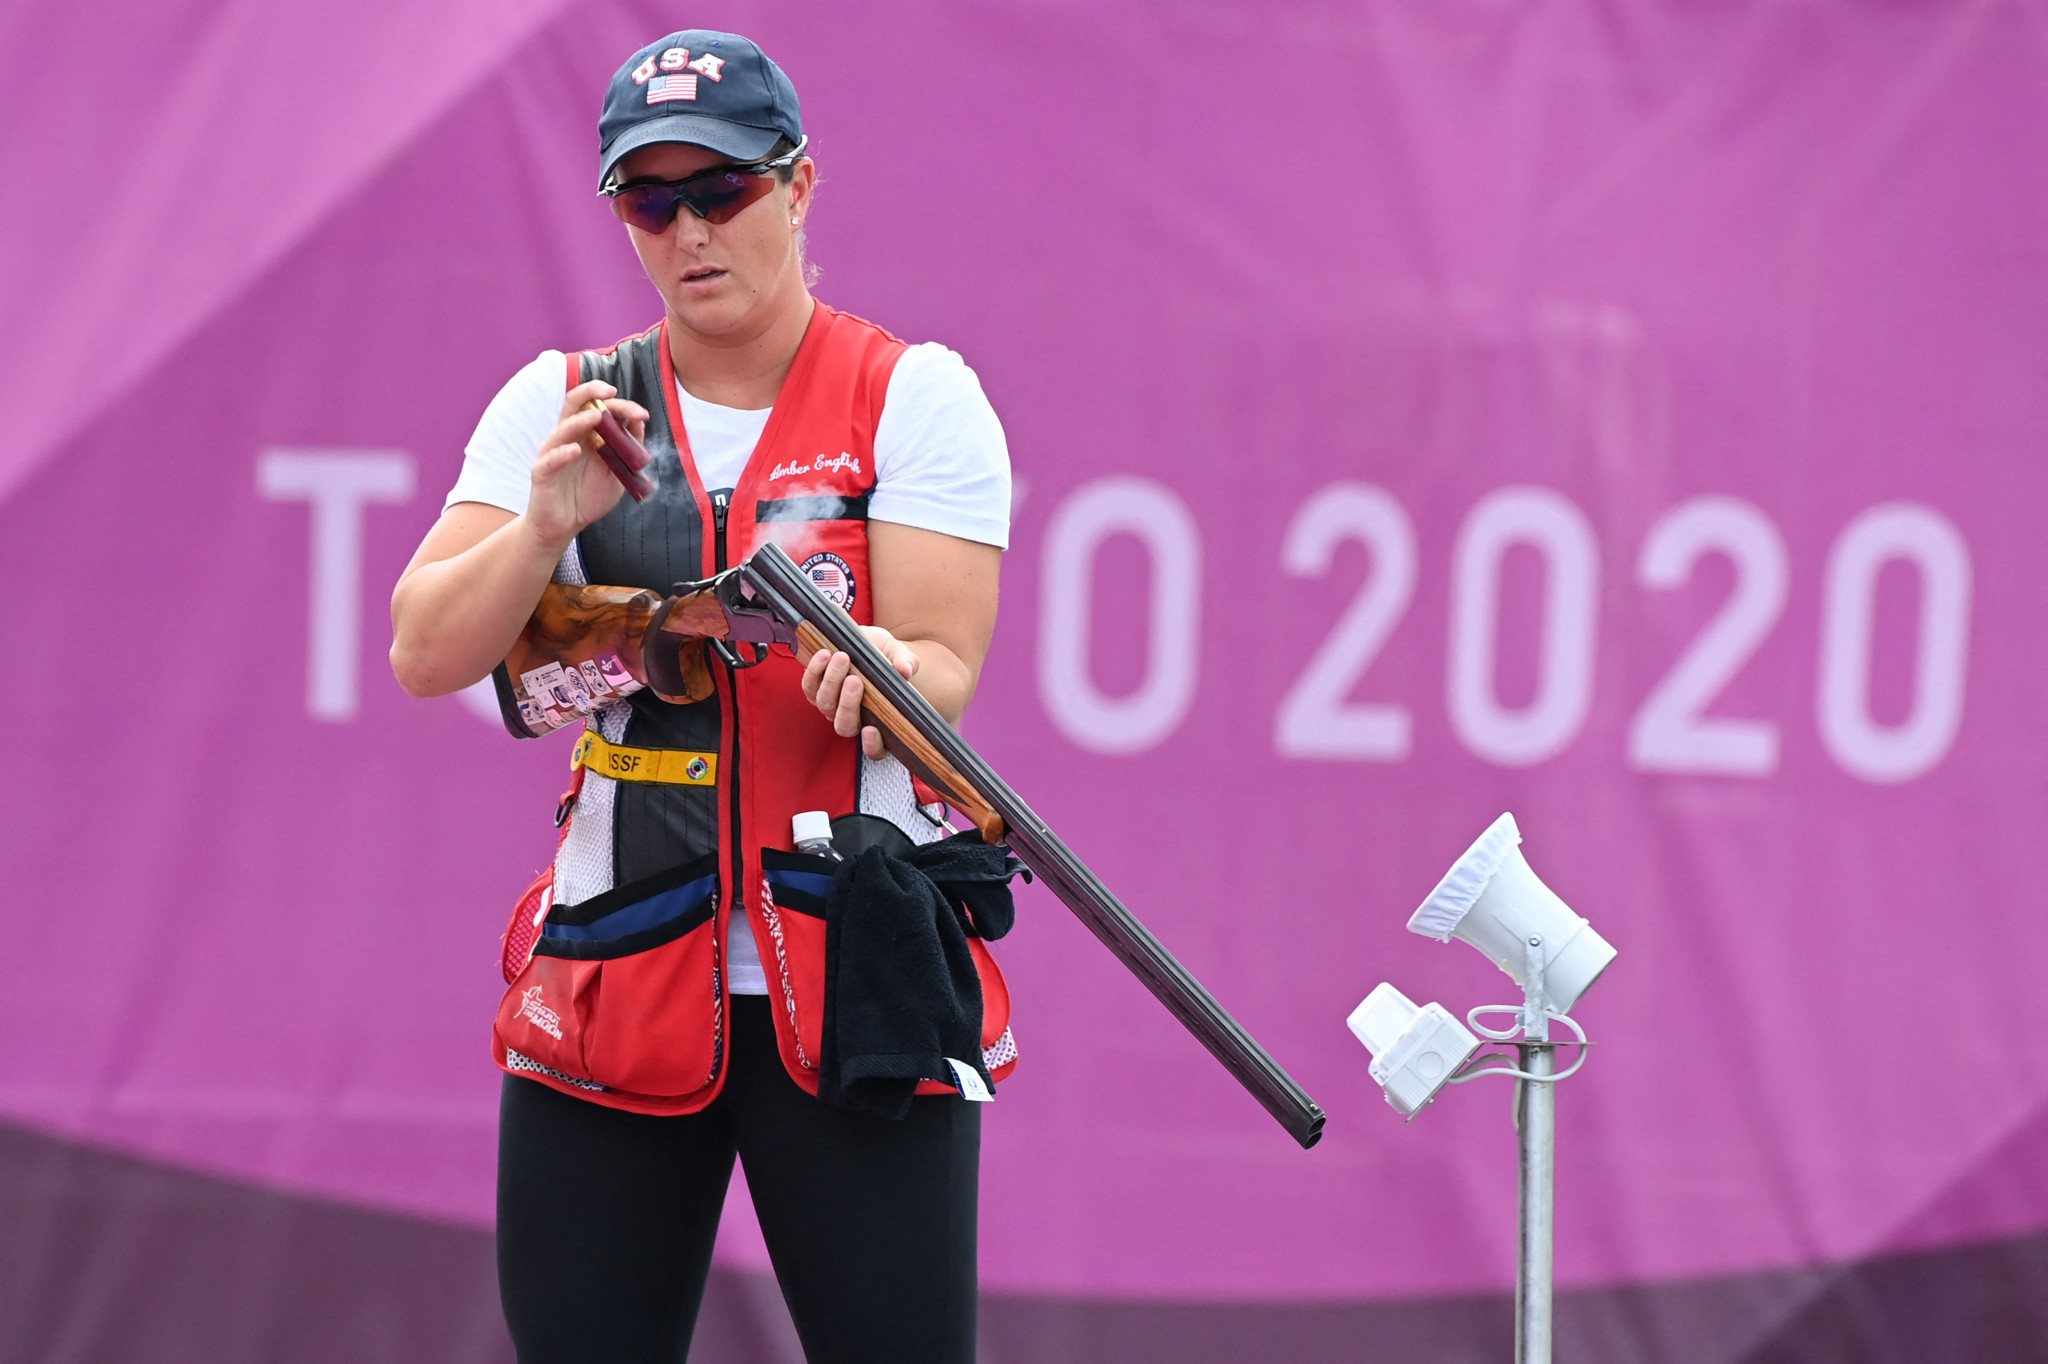 Tokyo 2020 Olympic skeet champion Amber English is one of those elected to the ISSF Athletes' Committee ©ITG